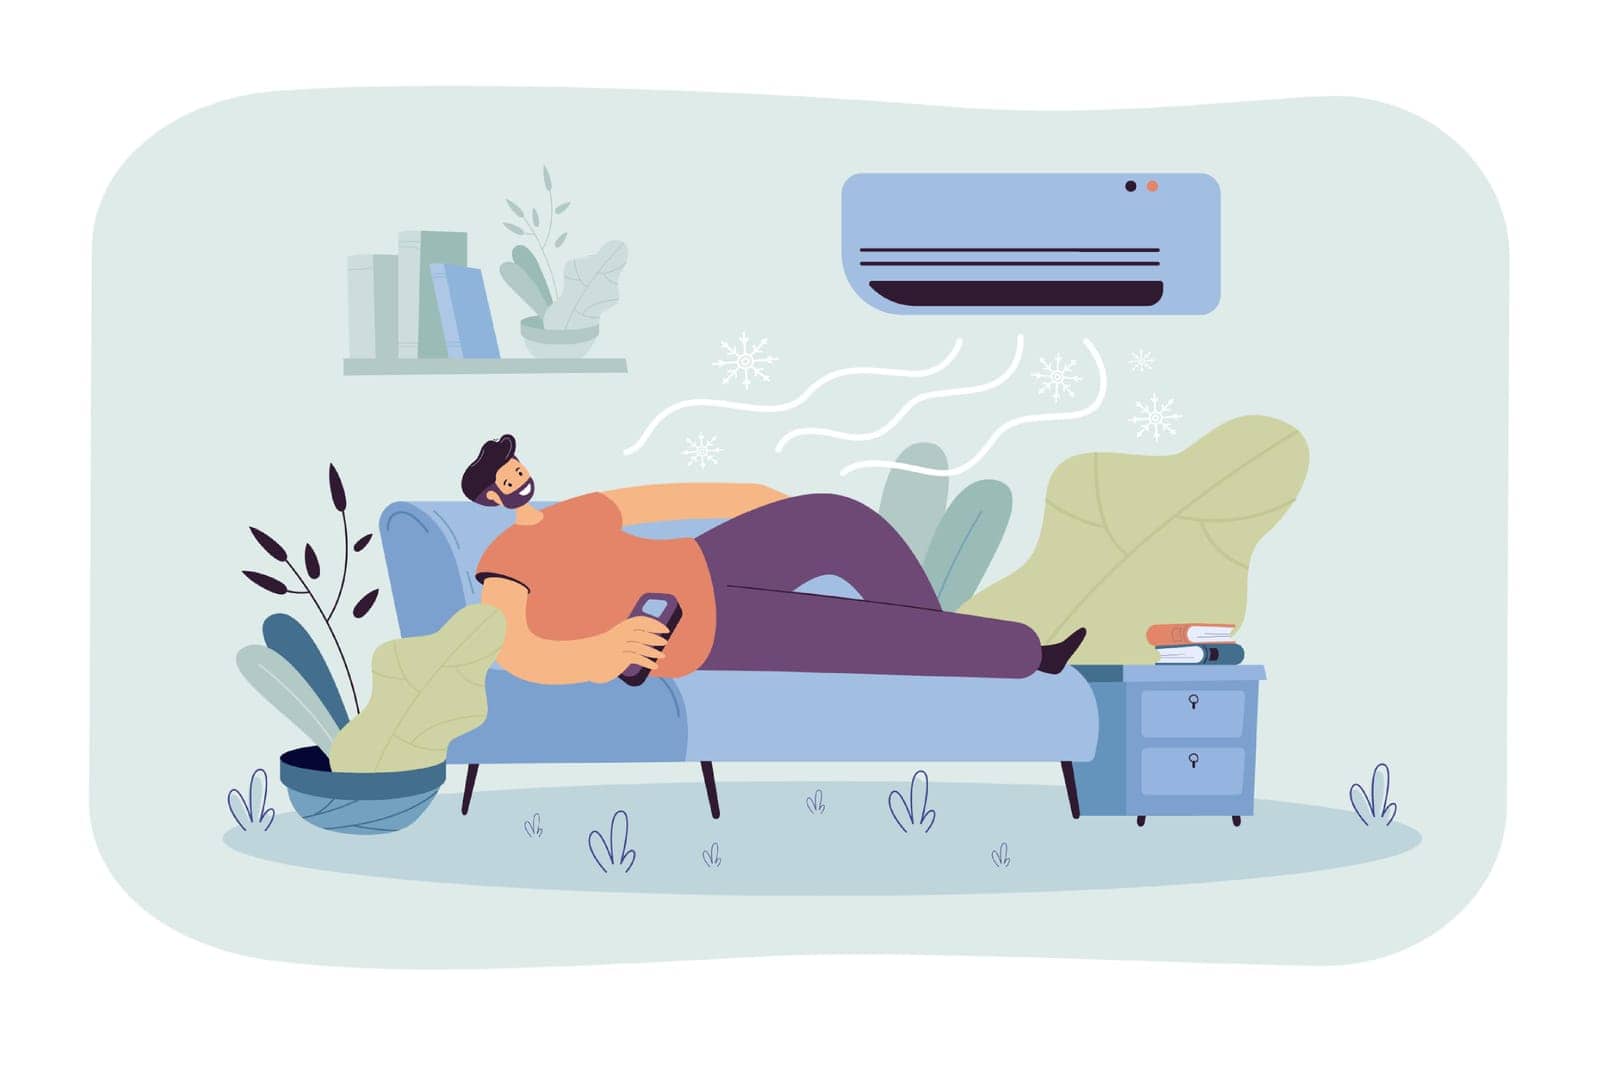 Man relaxing on couch under cold air flow from conditioner. Vector illustration for modern technology for house, home appliance, climate control concept